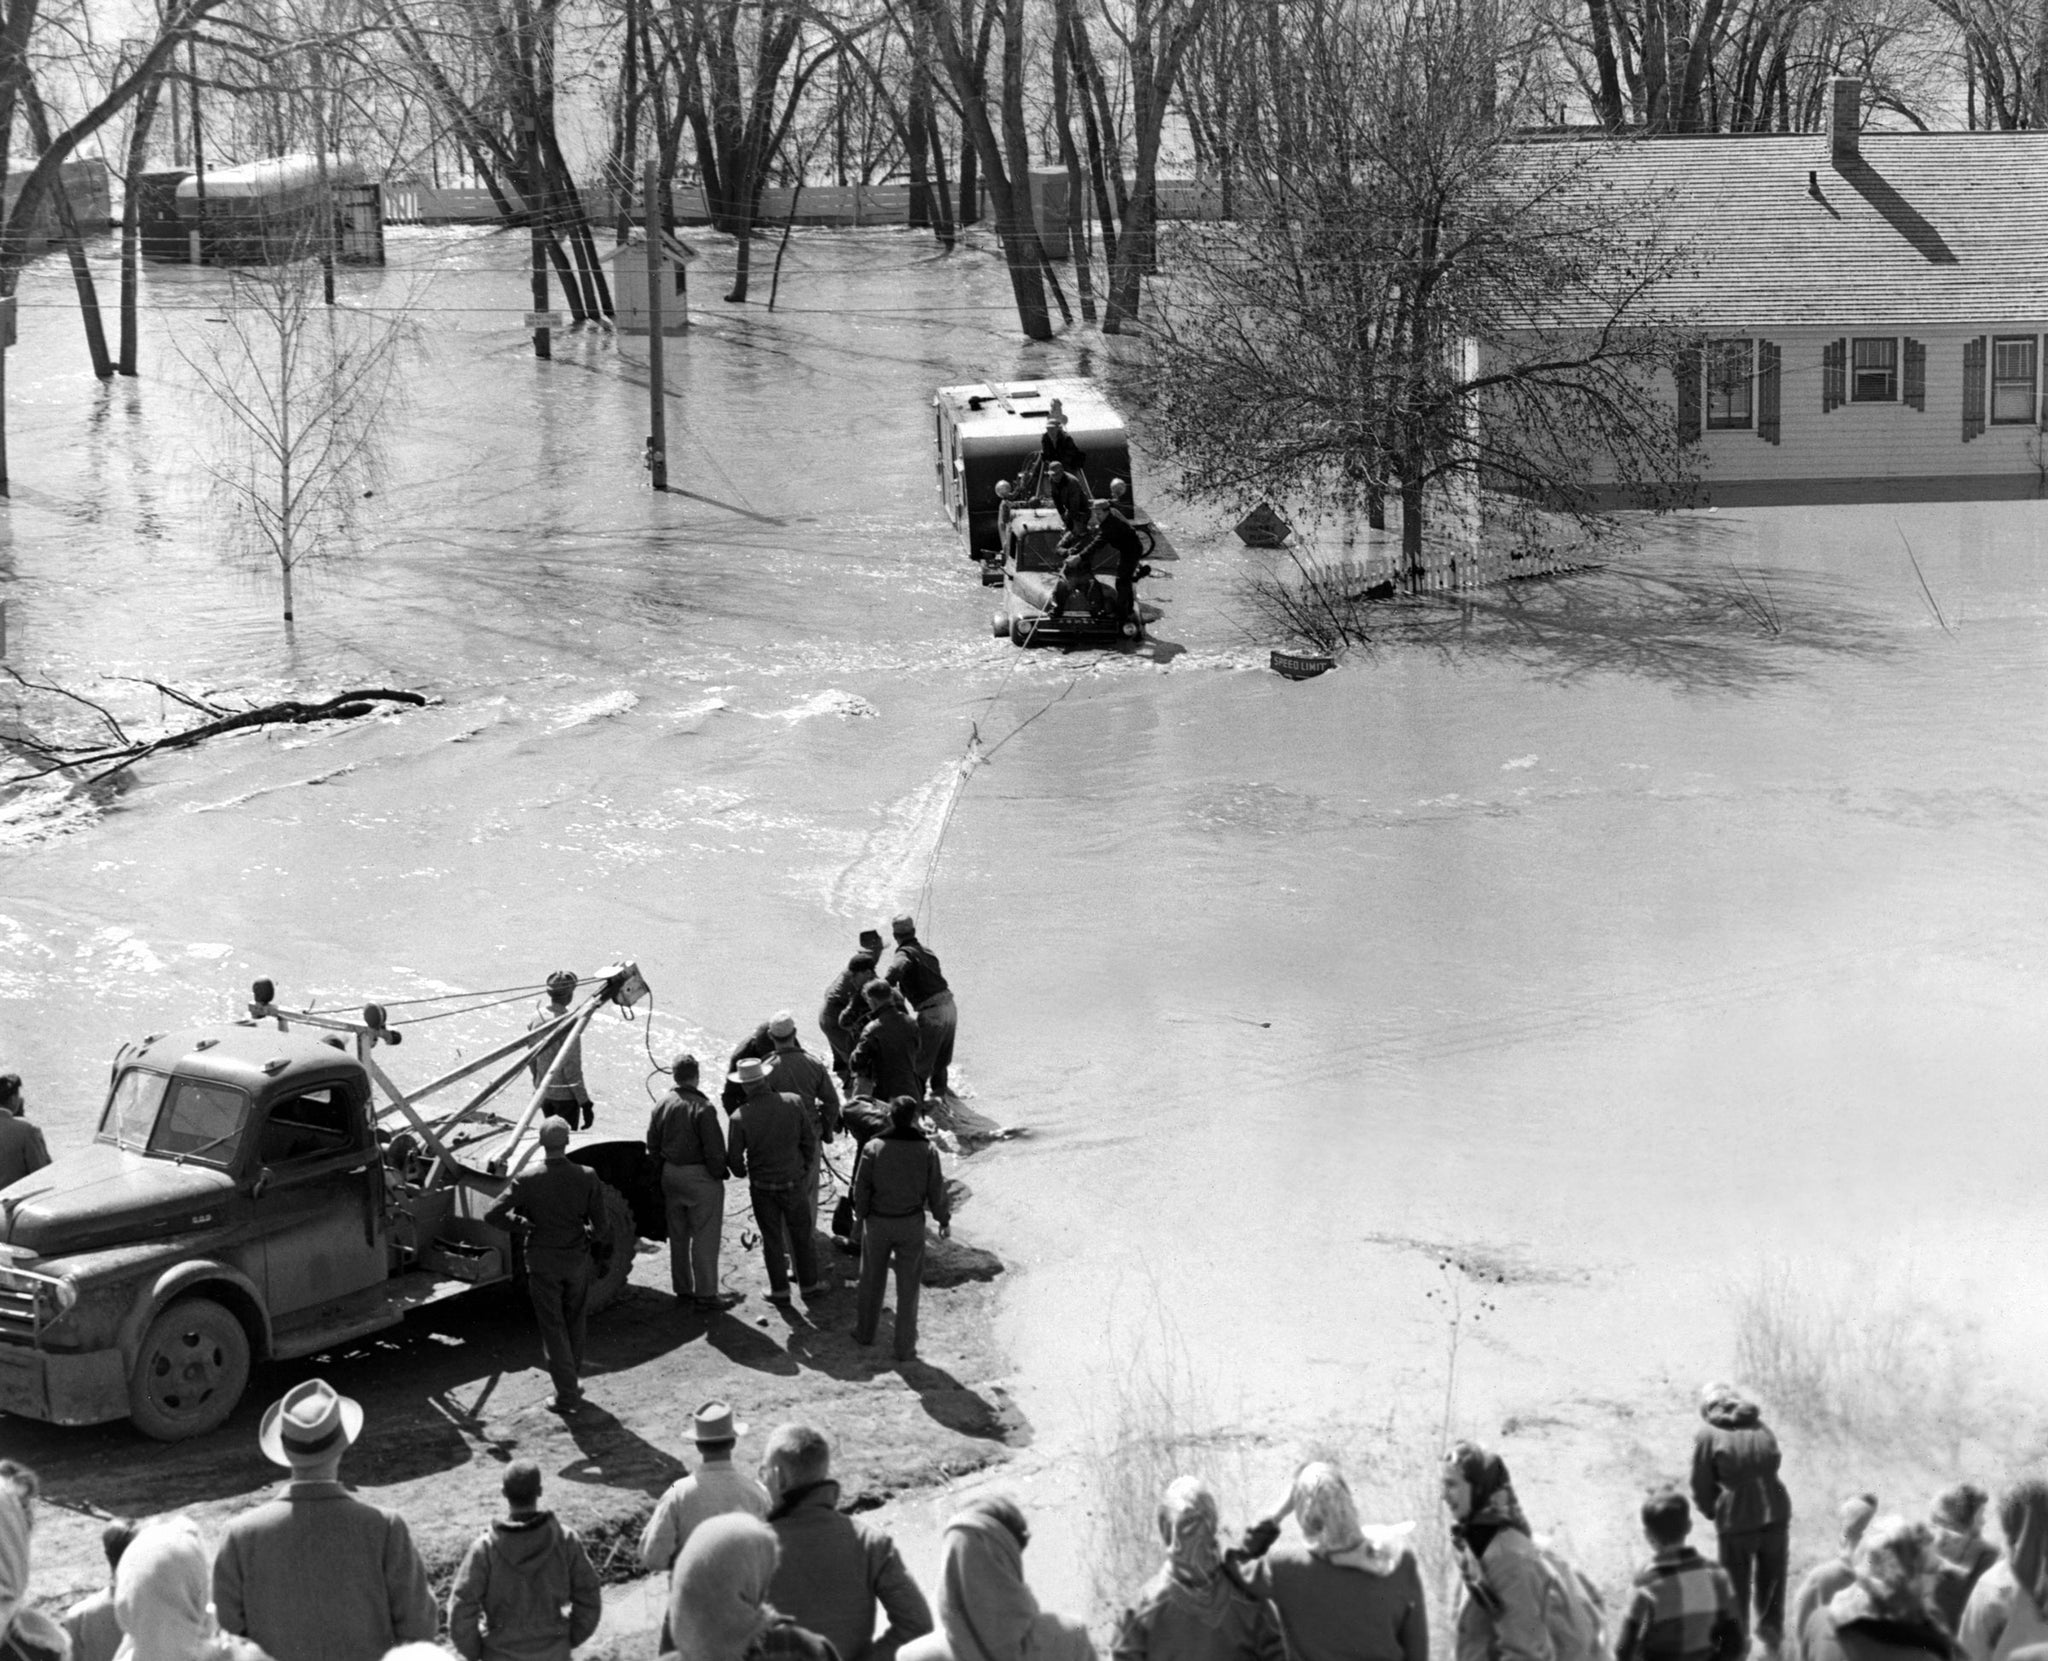 A team rescues the truck that was sent in to rescue the last trailer from Mader’s Trailer Court, Bismarck, 1952. A rescue line from the shore was thrown to the truck which stalled in the deep water while trying to pull the trailer to higher ground. Of the 52 trailers in the court, 49 were pulled out before the flood water trapped the three remaining trailers. -- BISMARCK TRIBUNE